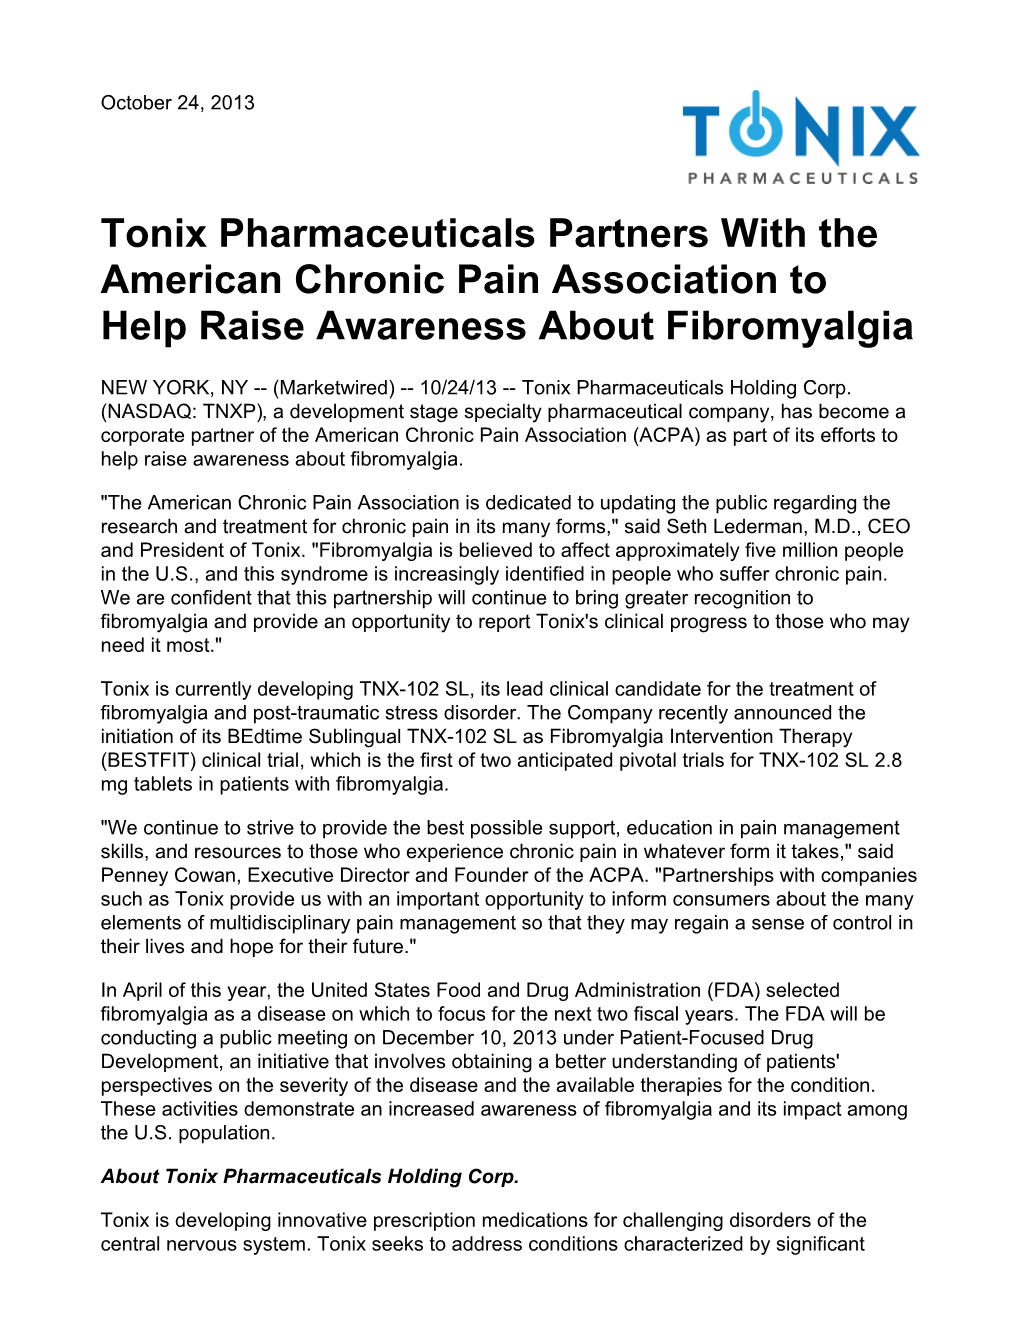 Tonix Pharmaceuticals Partners with the American Chronic Pain Association to Help Raise Awareness About Fibromyalgia